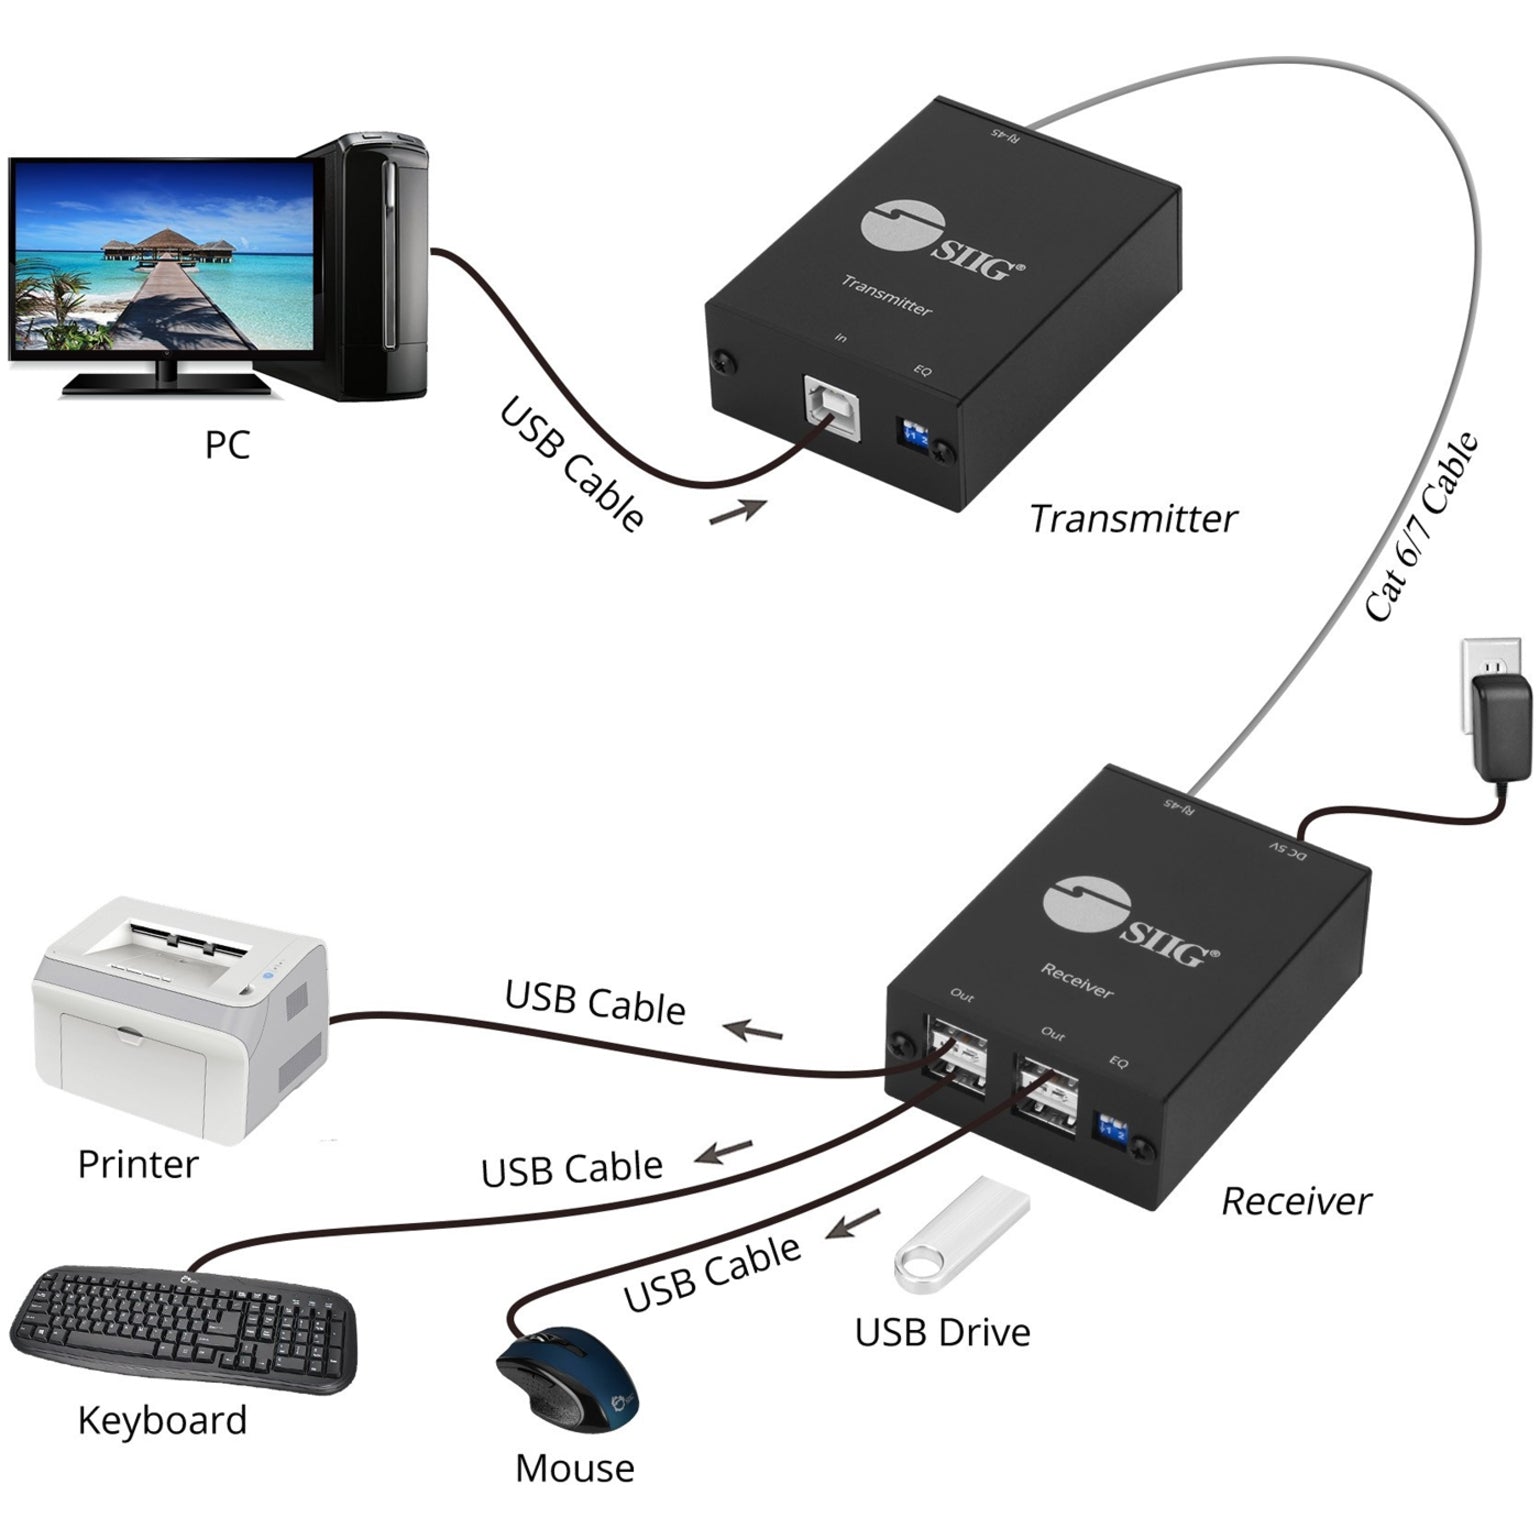 SIIG JU-EX0311-S1 4-Port USB 2.0 Extender, Extend USB Connections up to 262.47 ft